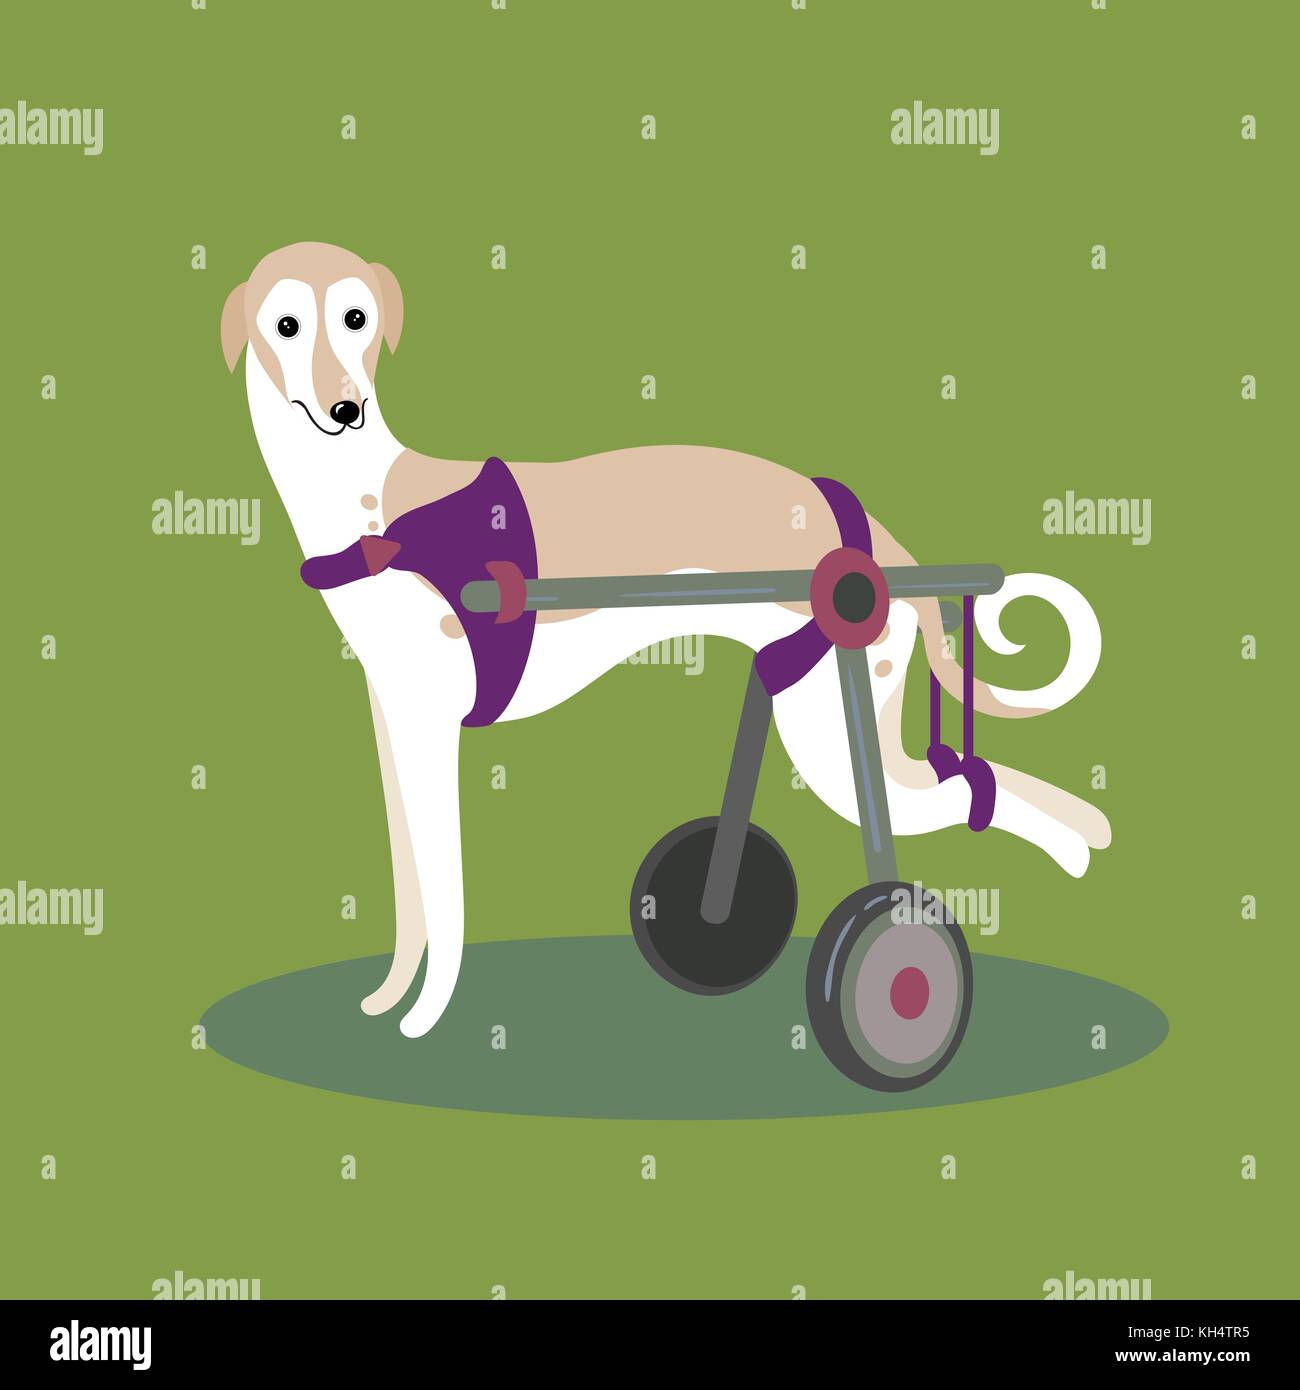 Set of handicapped disabled dogs Stock Vector